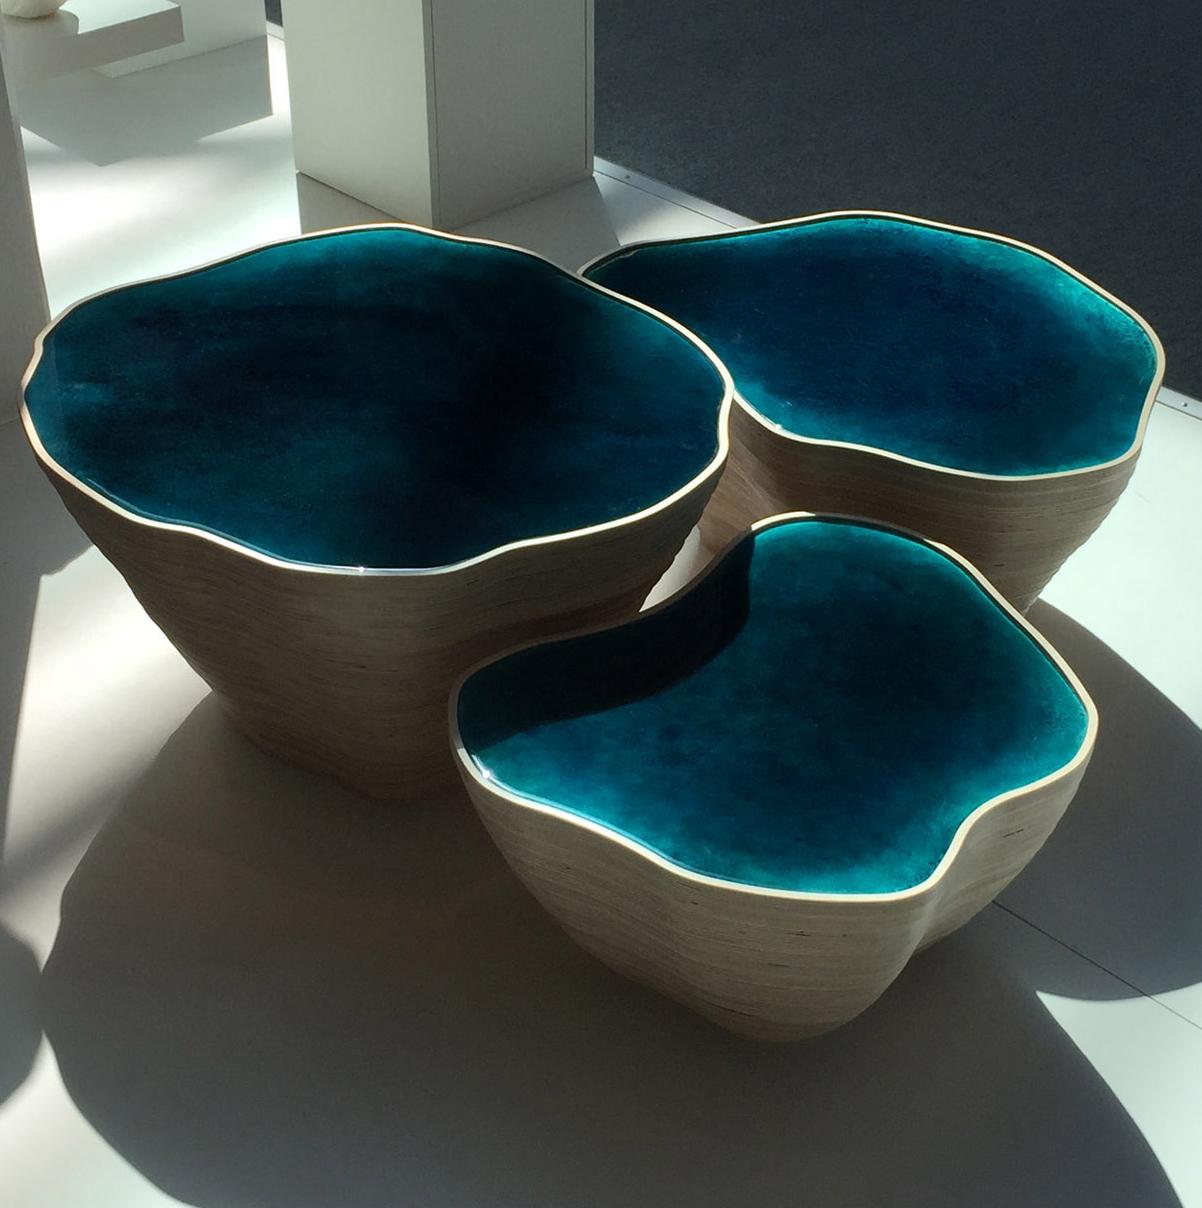 A designer's creation composition of three Blue coffe center tables and  or stools of different dimensions,  inspired by the Russian dolls and by the nature, the rocks  and sea of Bretagne's French region, with sensual and soft curves as the